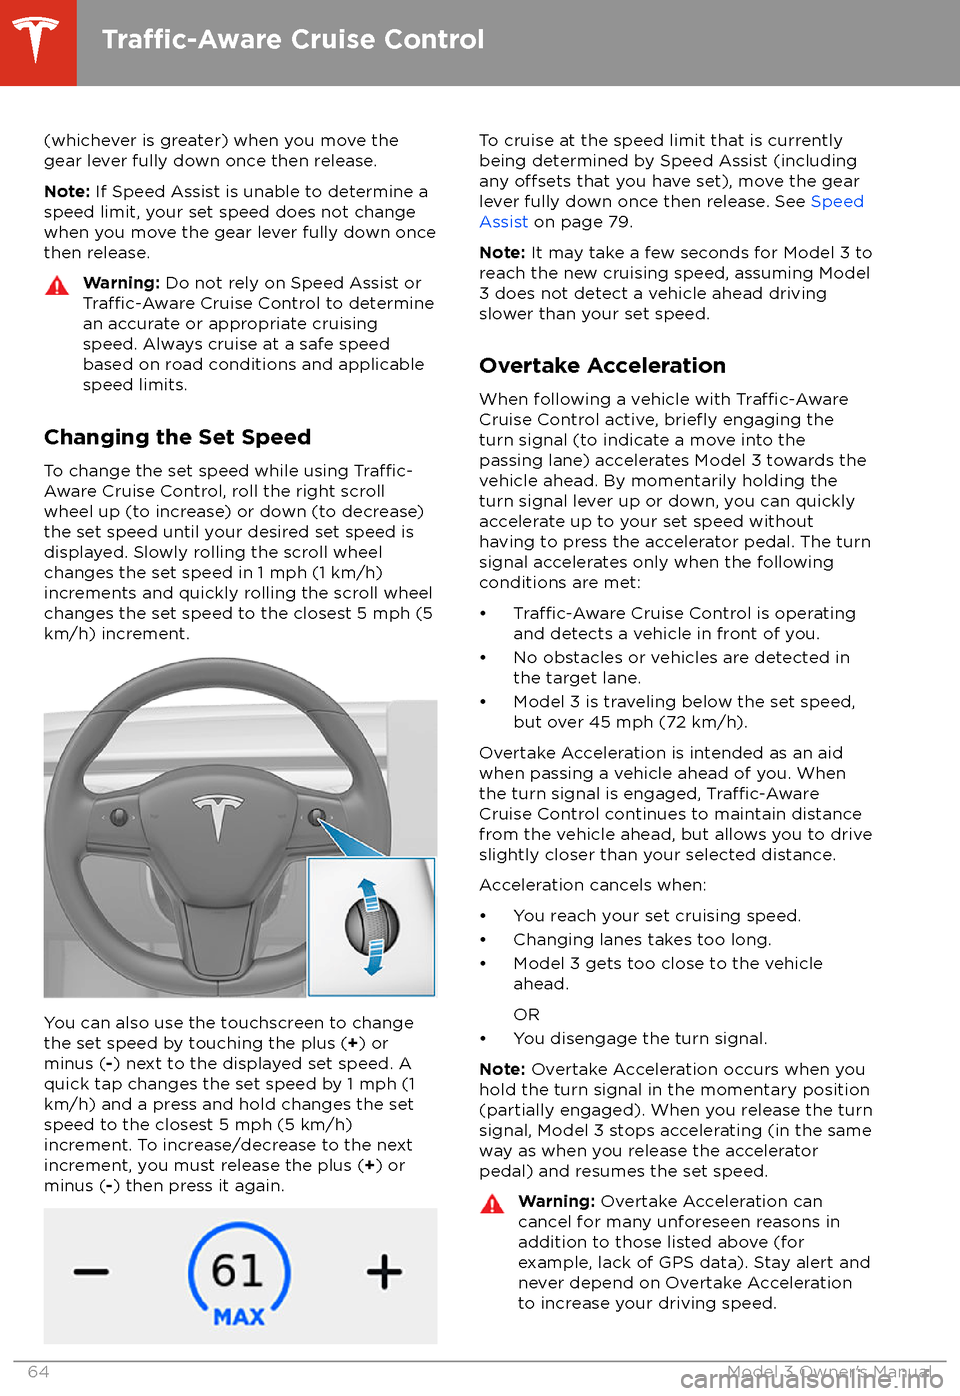 TESLA MODEL 3 2018 Repair Manual (whichever is greater) when you move the
gear lever fully down once then release.
Note:  If Speed Assist is unable to determine a
speed limit, your set speed does not change
when you move the gear lev